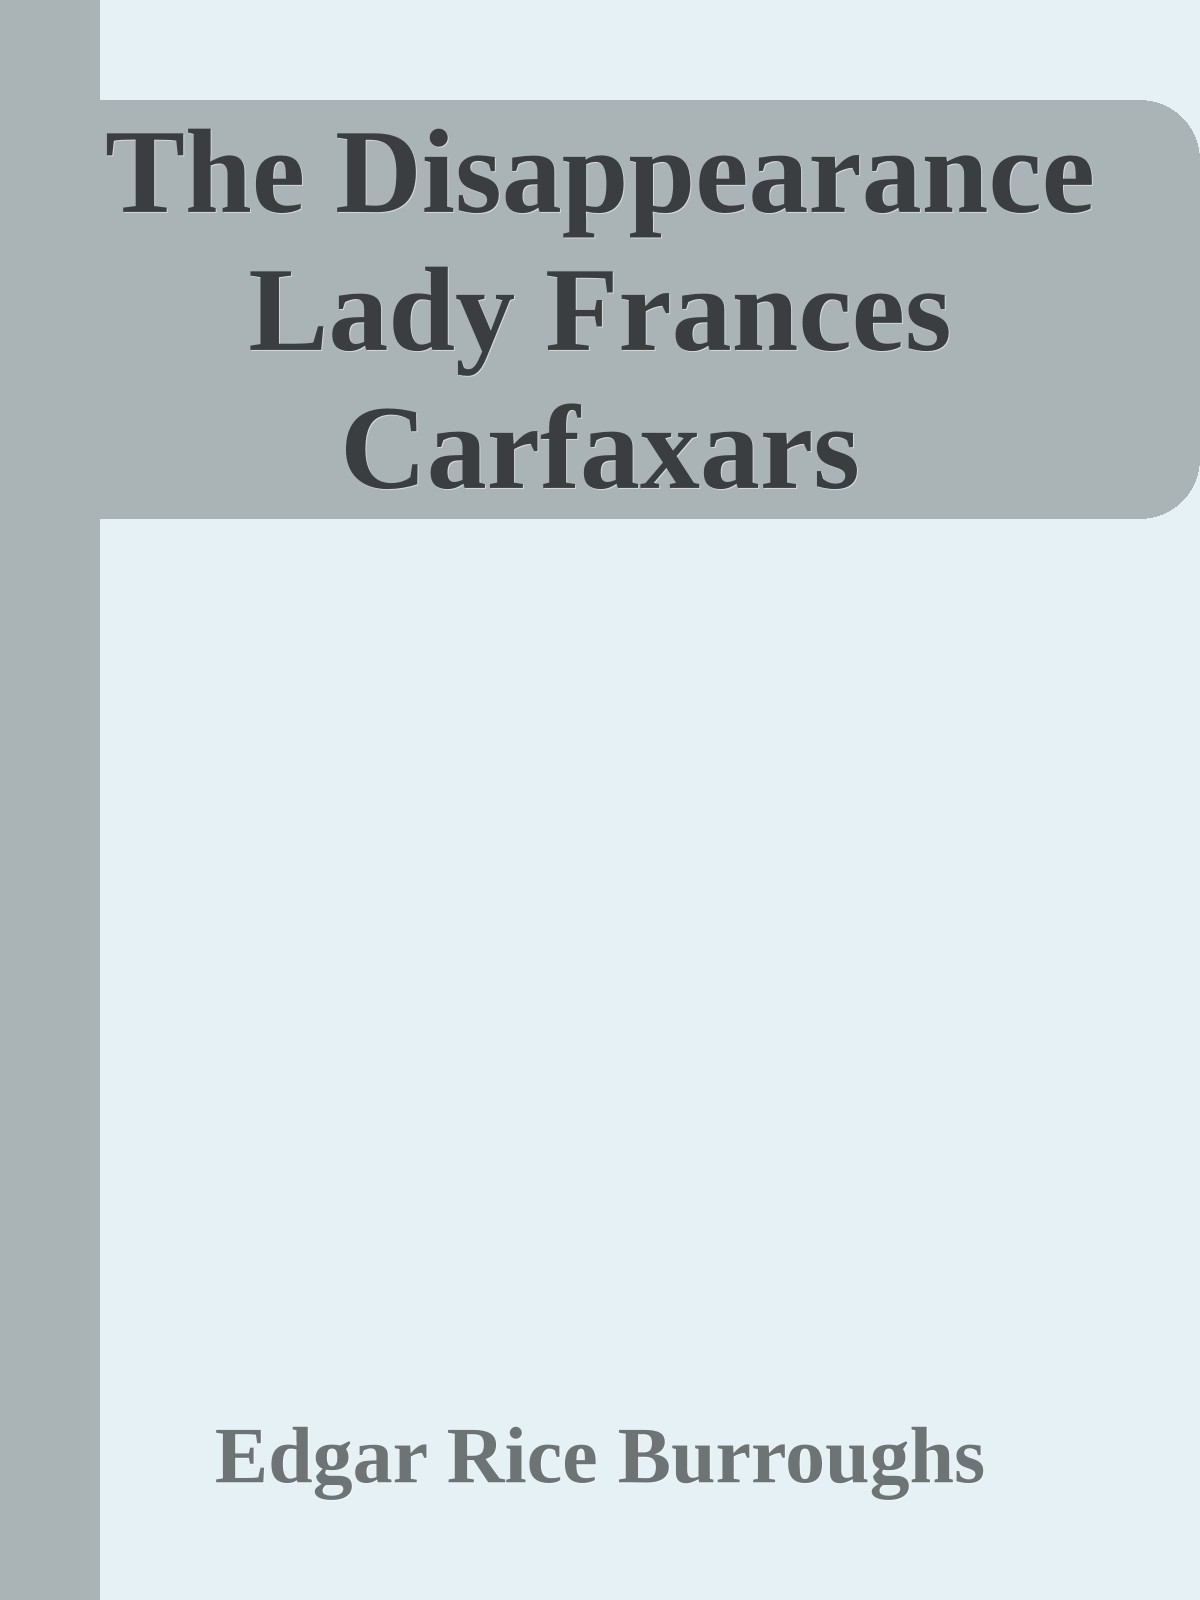 The Disappearance Lady Frances Carfaxars